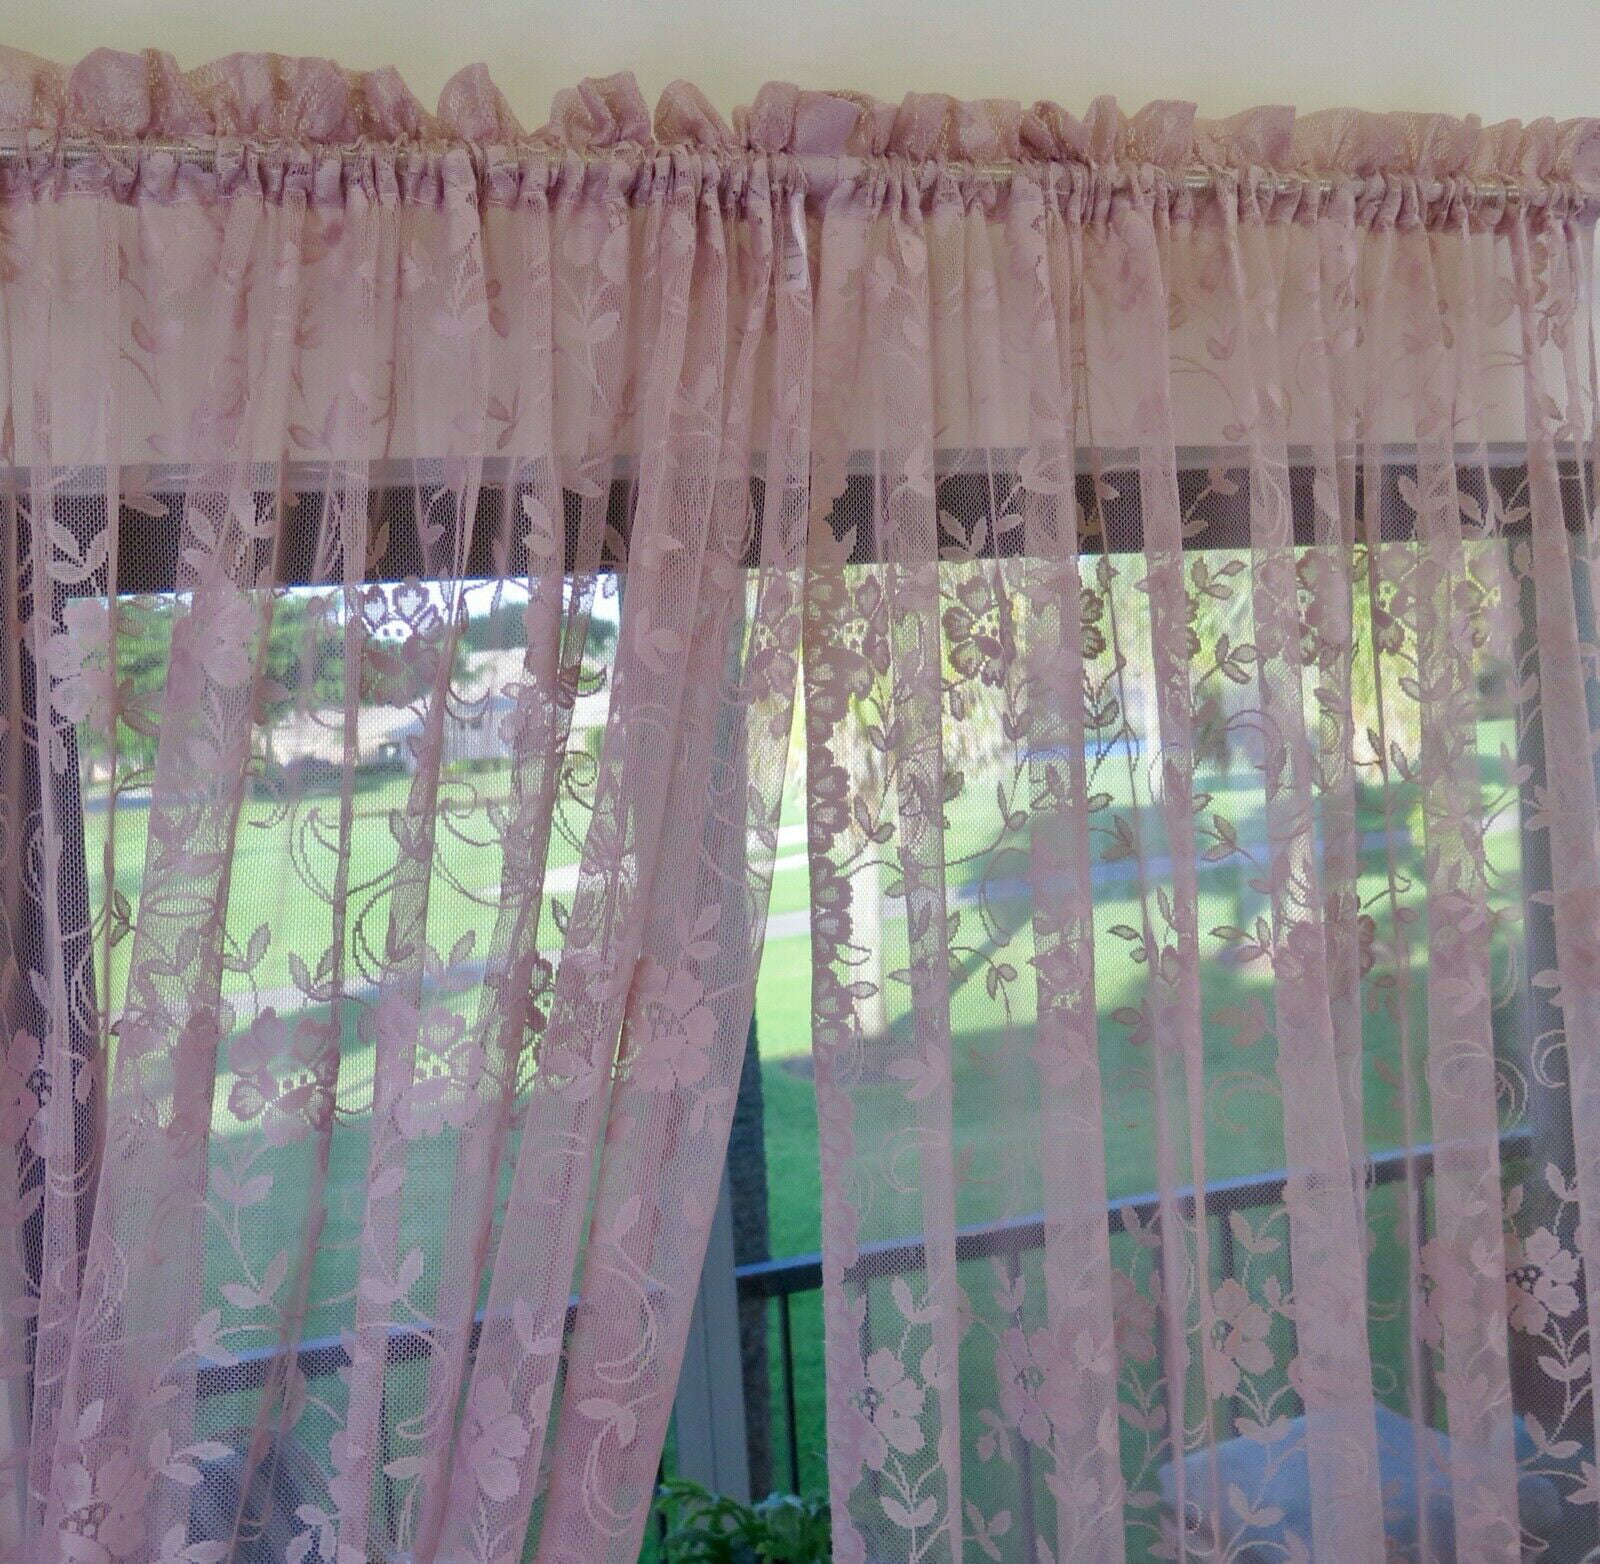 Shabby Chic Floral Lace Window Curtain Panels/Balloon Curtains Separate Valances 